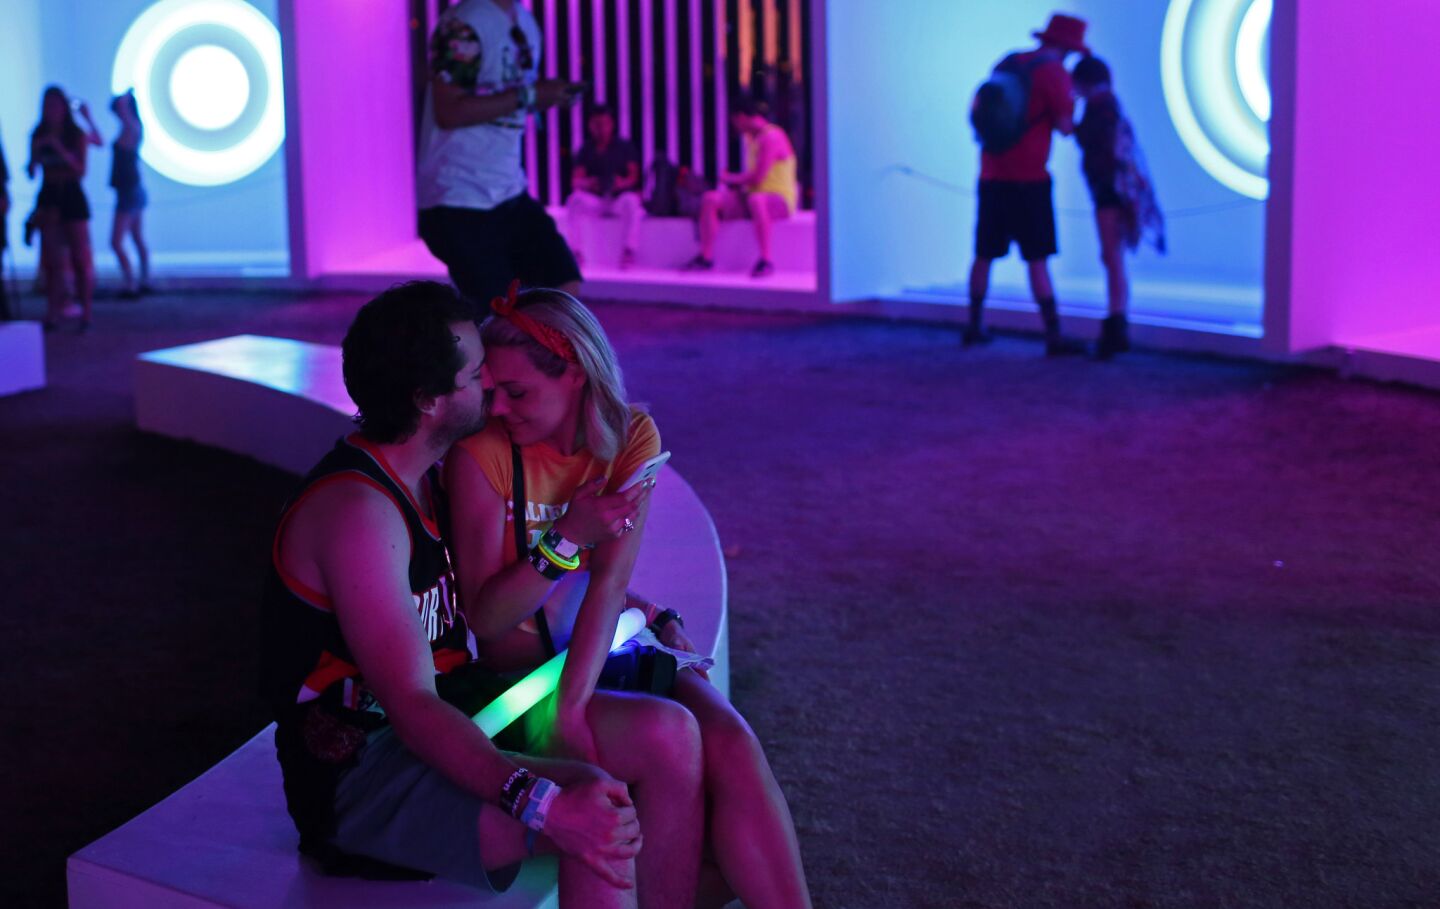 A couple shares a moment inside the Portals art installation at the Coachella Valley Music and Arts Festival.